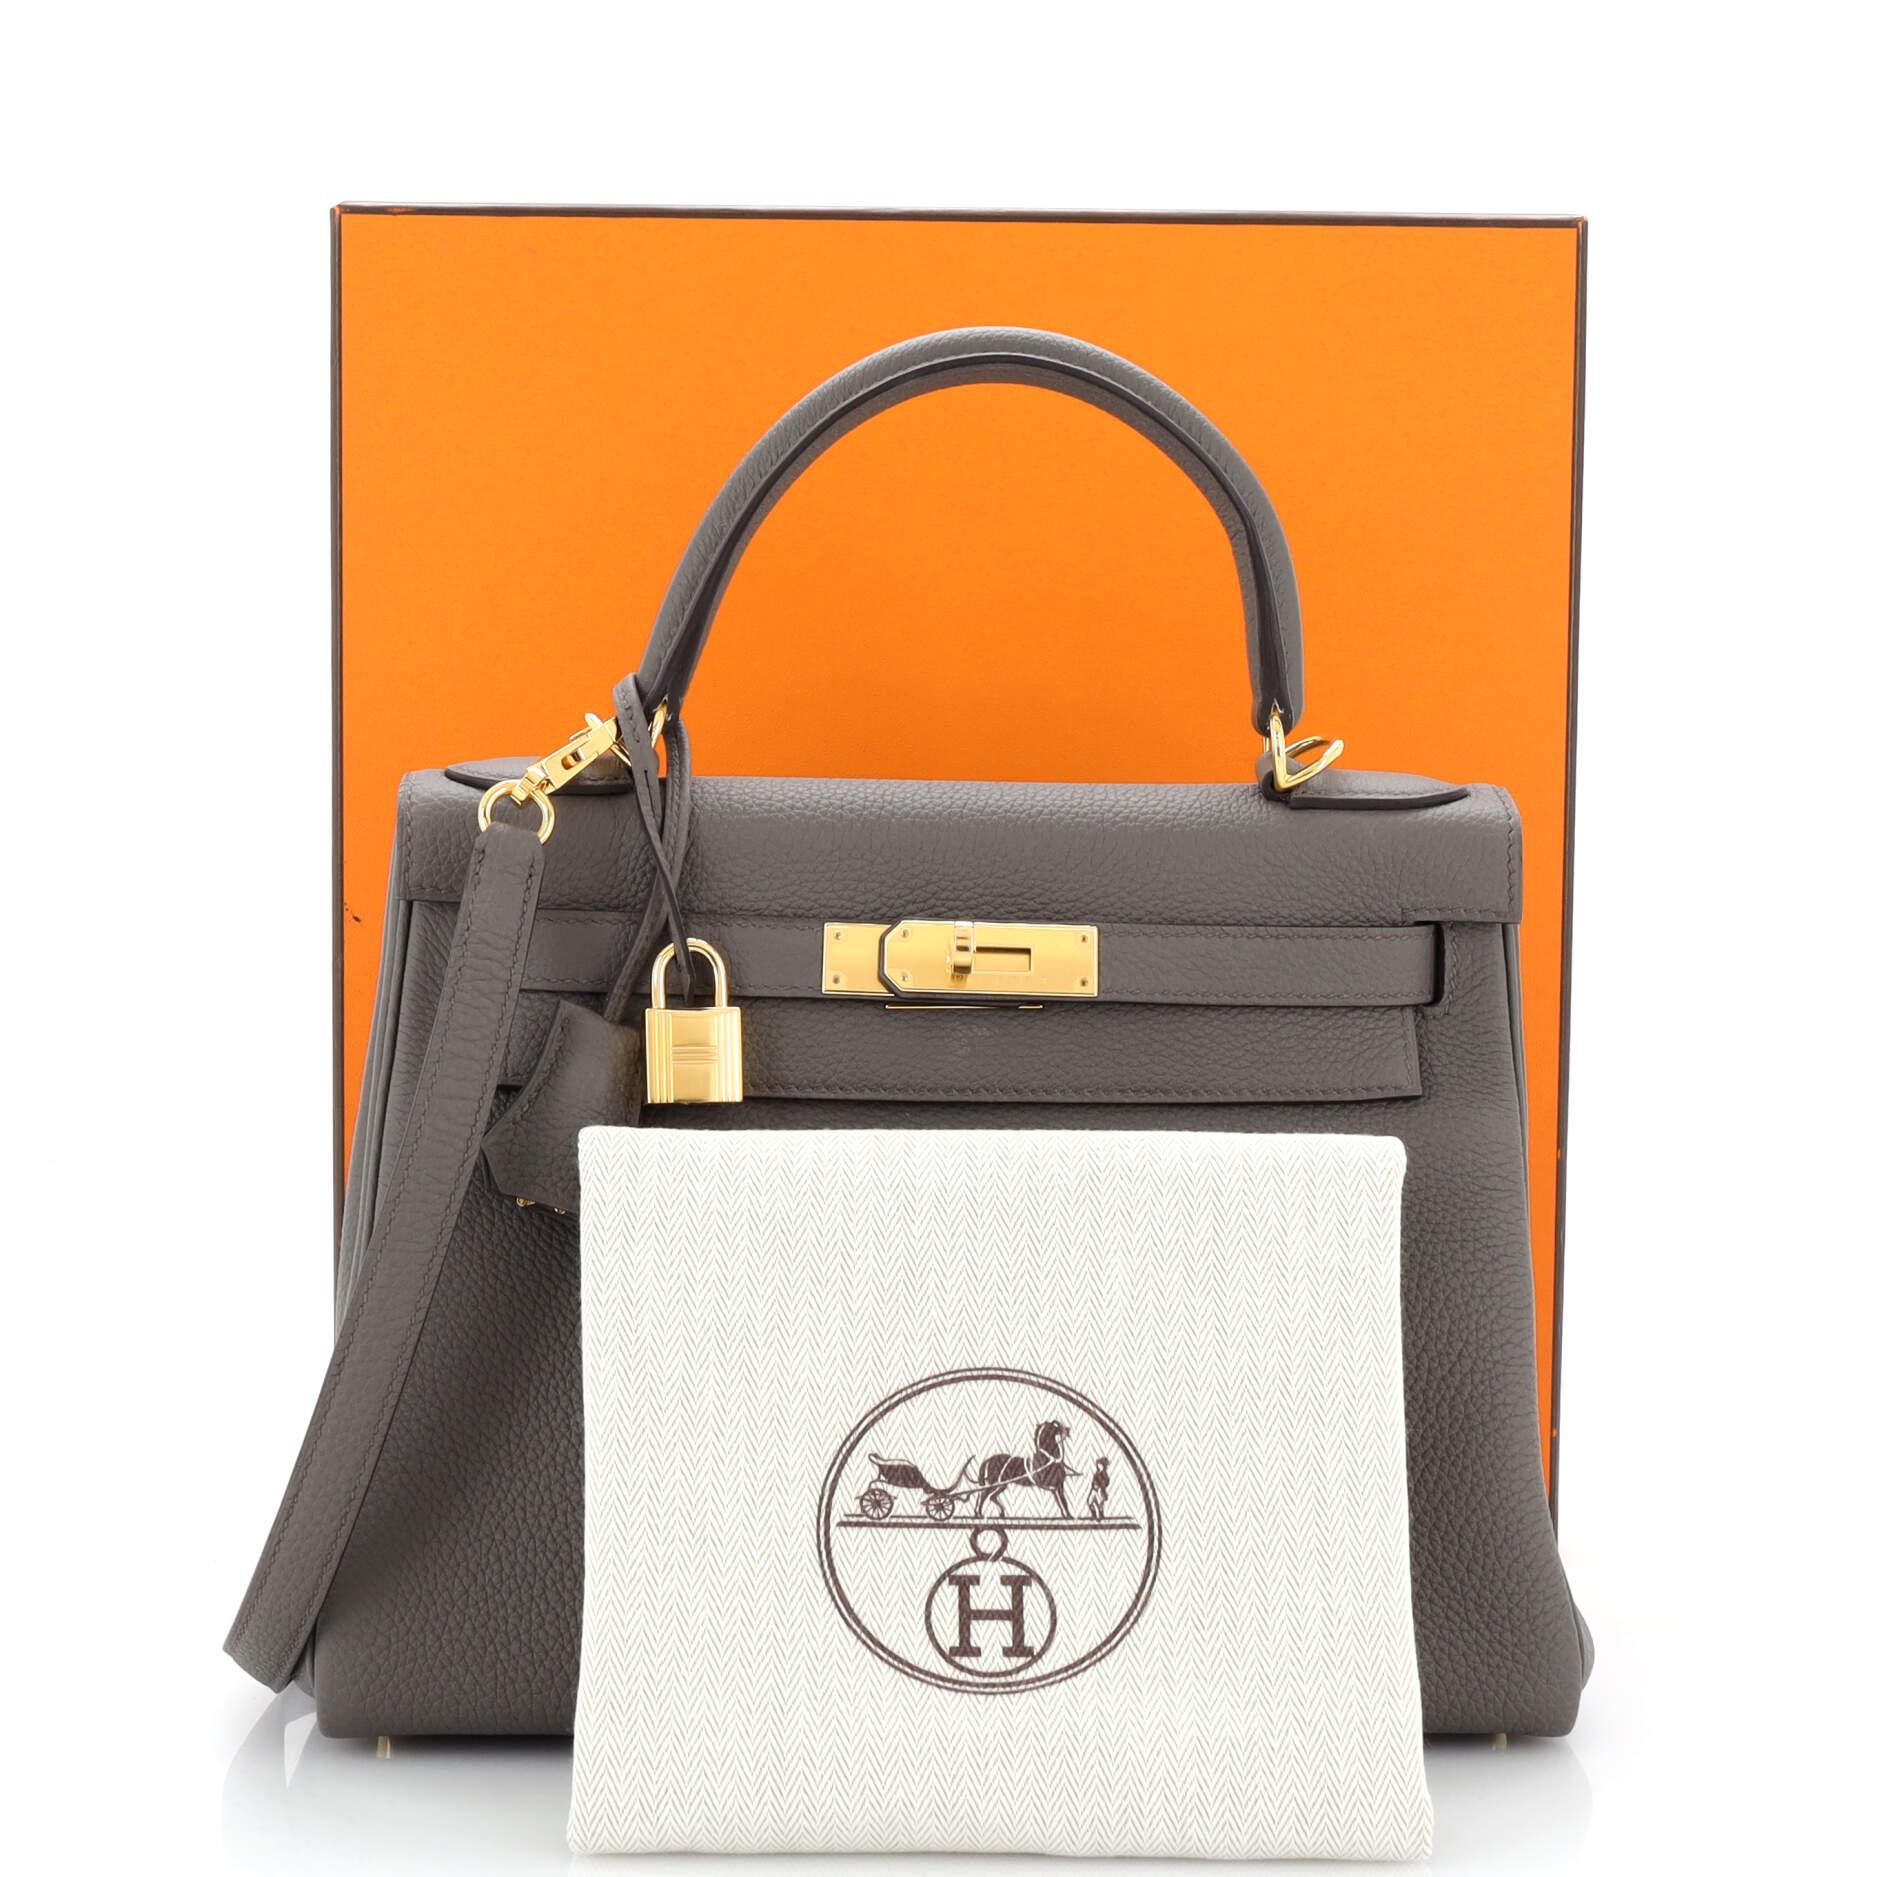 Hermes Authentic 28 cm Hermes KELLY Bag ETAIN Grey Togo Leather New in Box